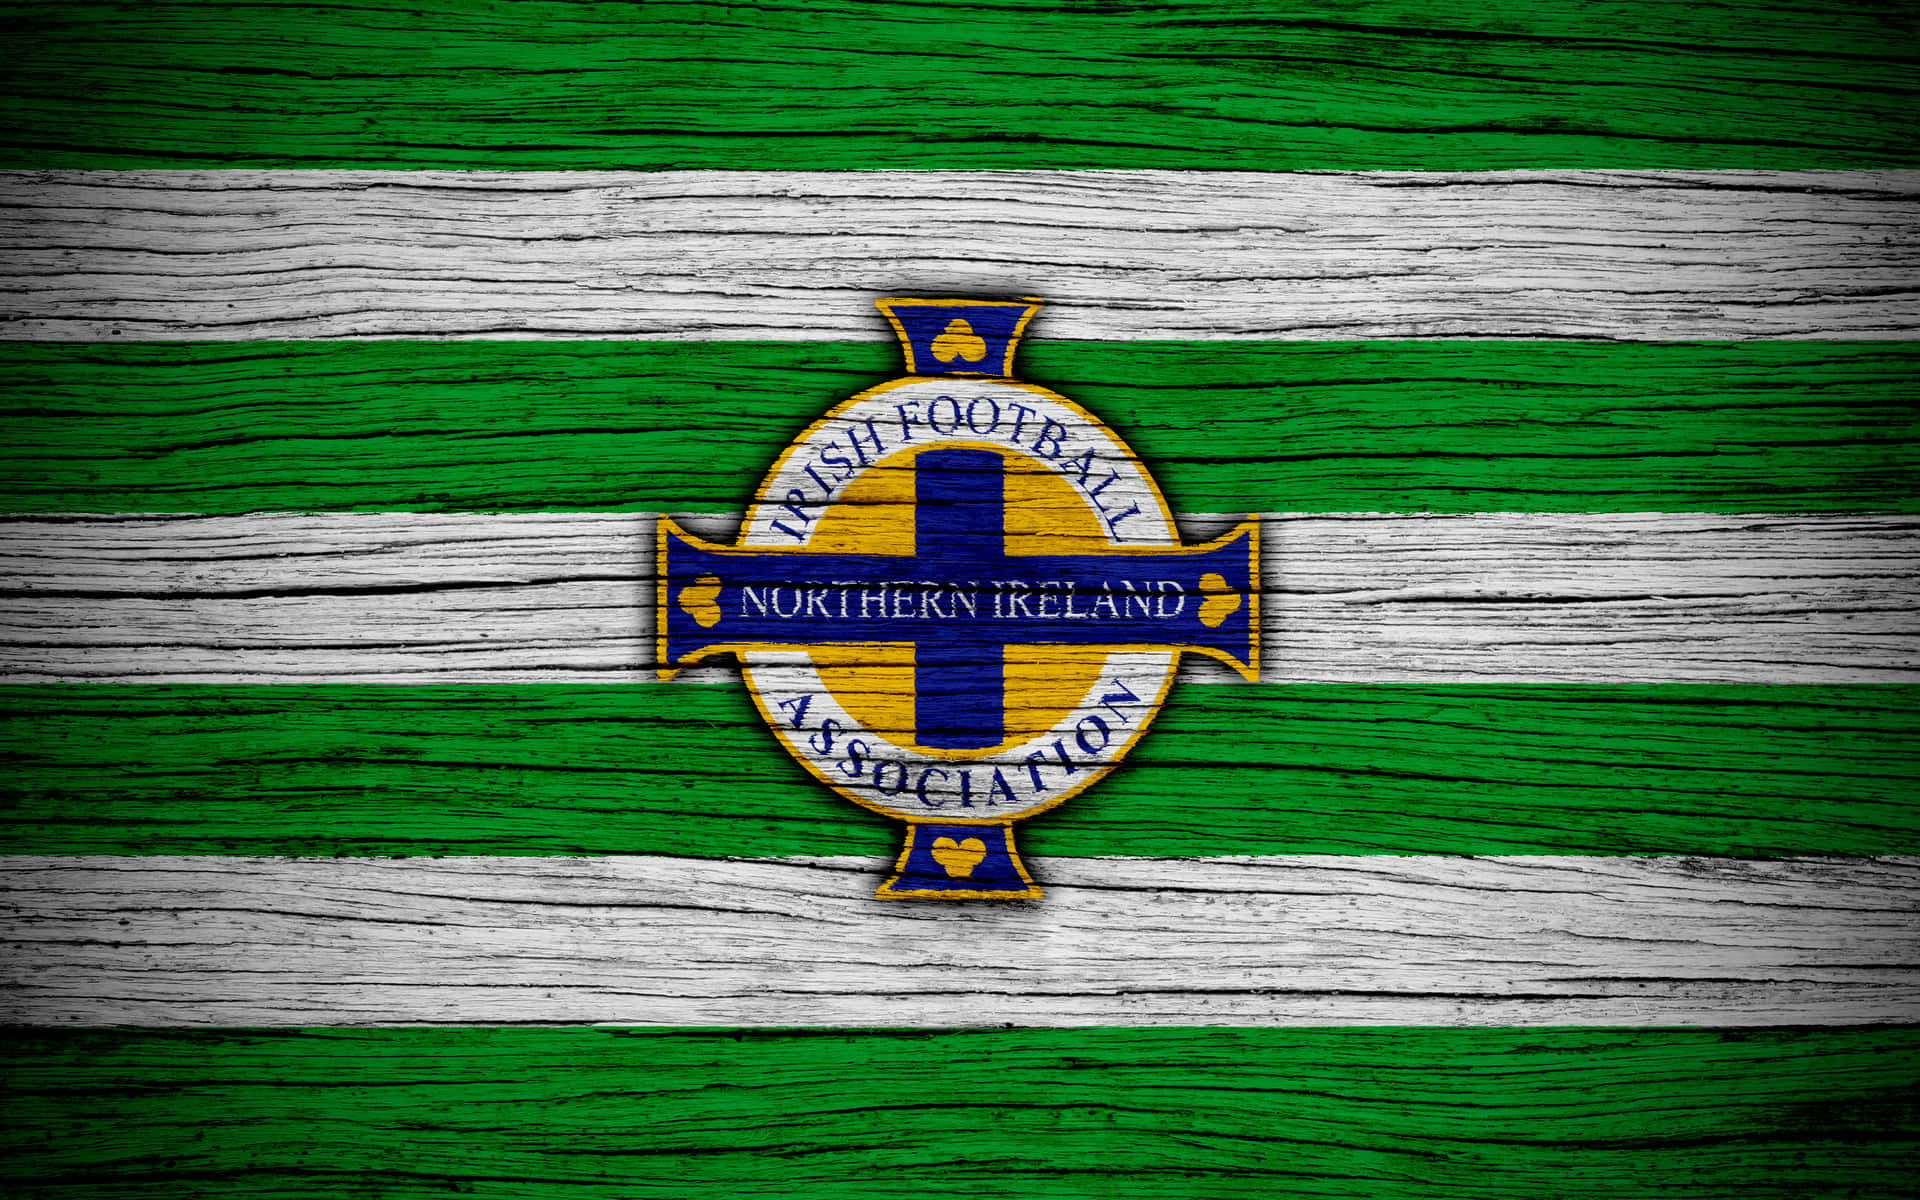 Northern Ireland Green And White Stripes Football Association